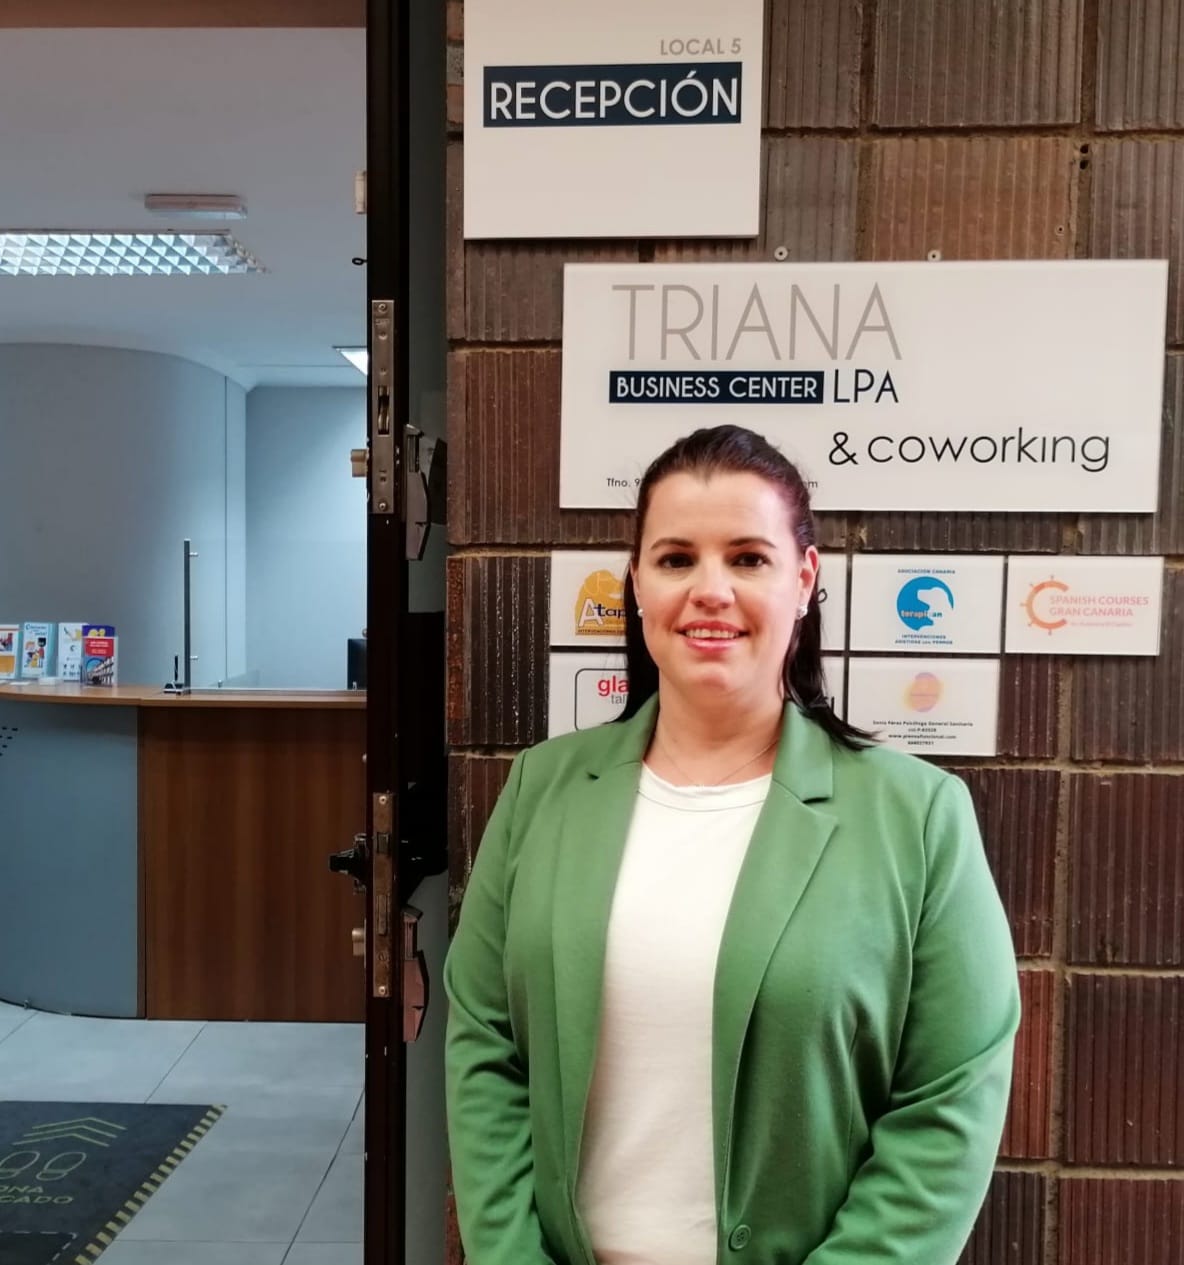 TrianaLPA Bussiness Center & Coworking